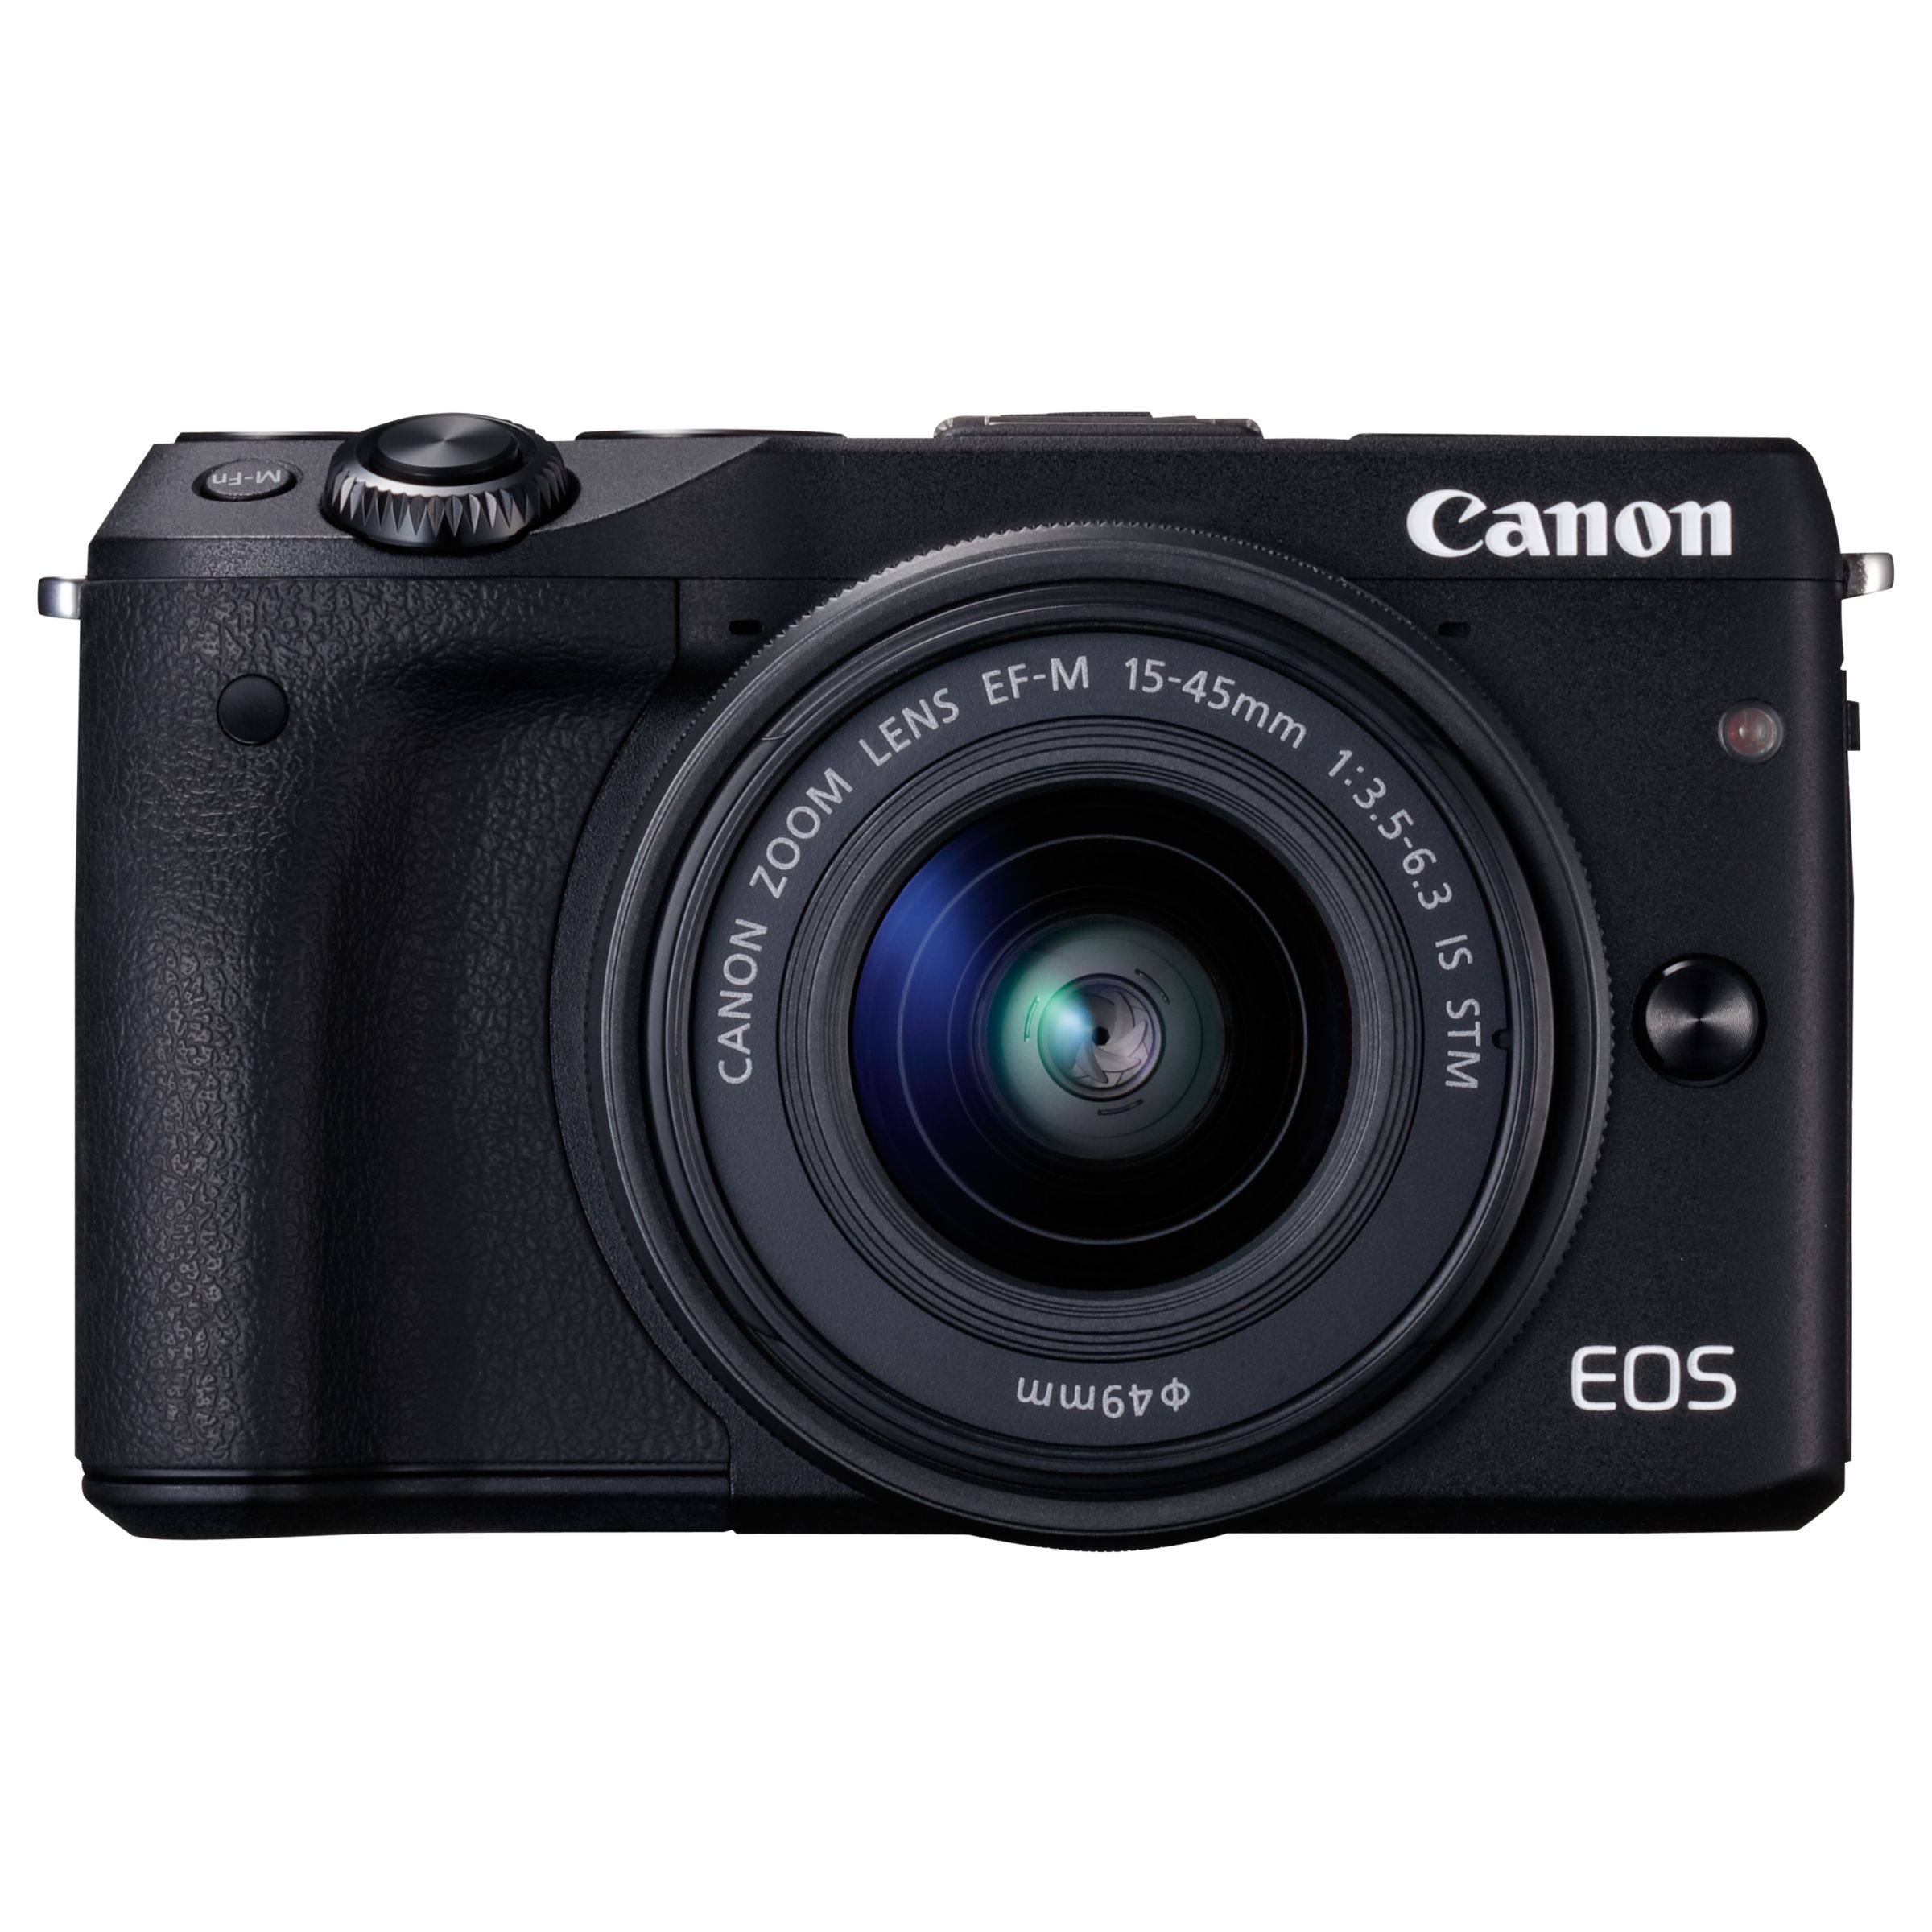 Canon EOS M3 Camera with EF-M 15-45mm IS STEM Lens, HD 1080p, 24.2MP, Wi-Fi, NFC, 3" LCD Screen